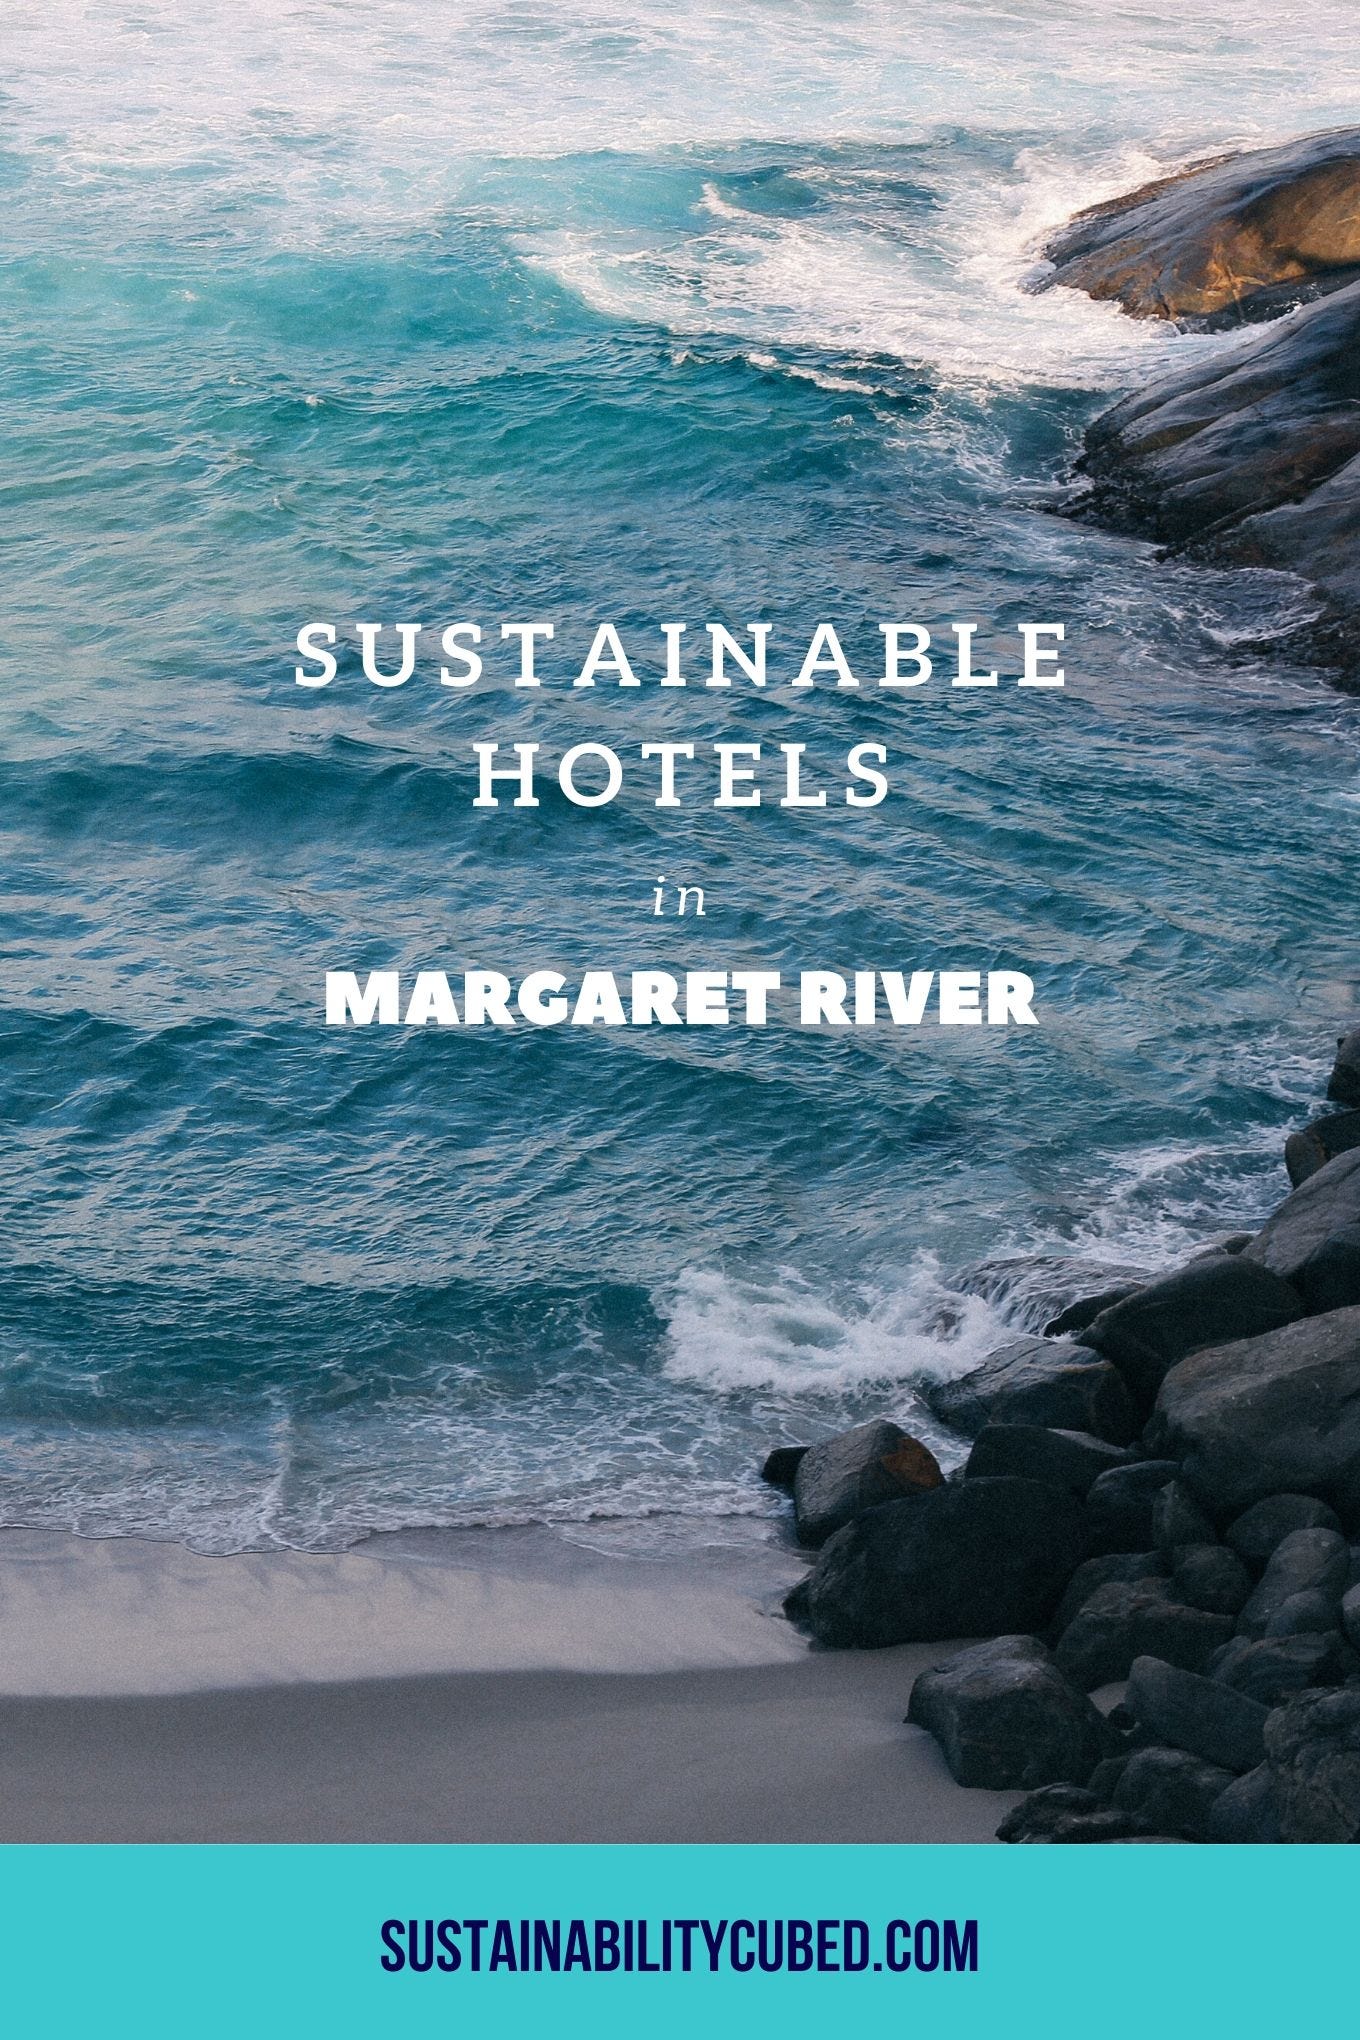 List of Sustainable Hotels in Margaret River